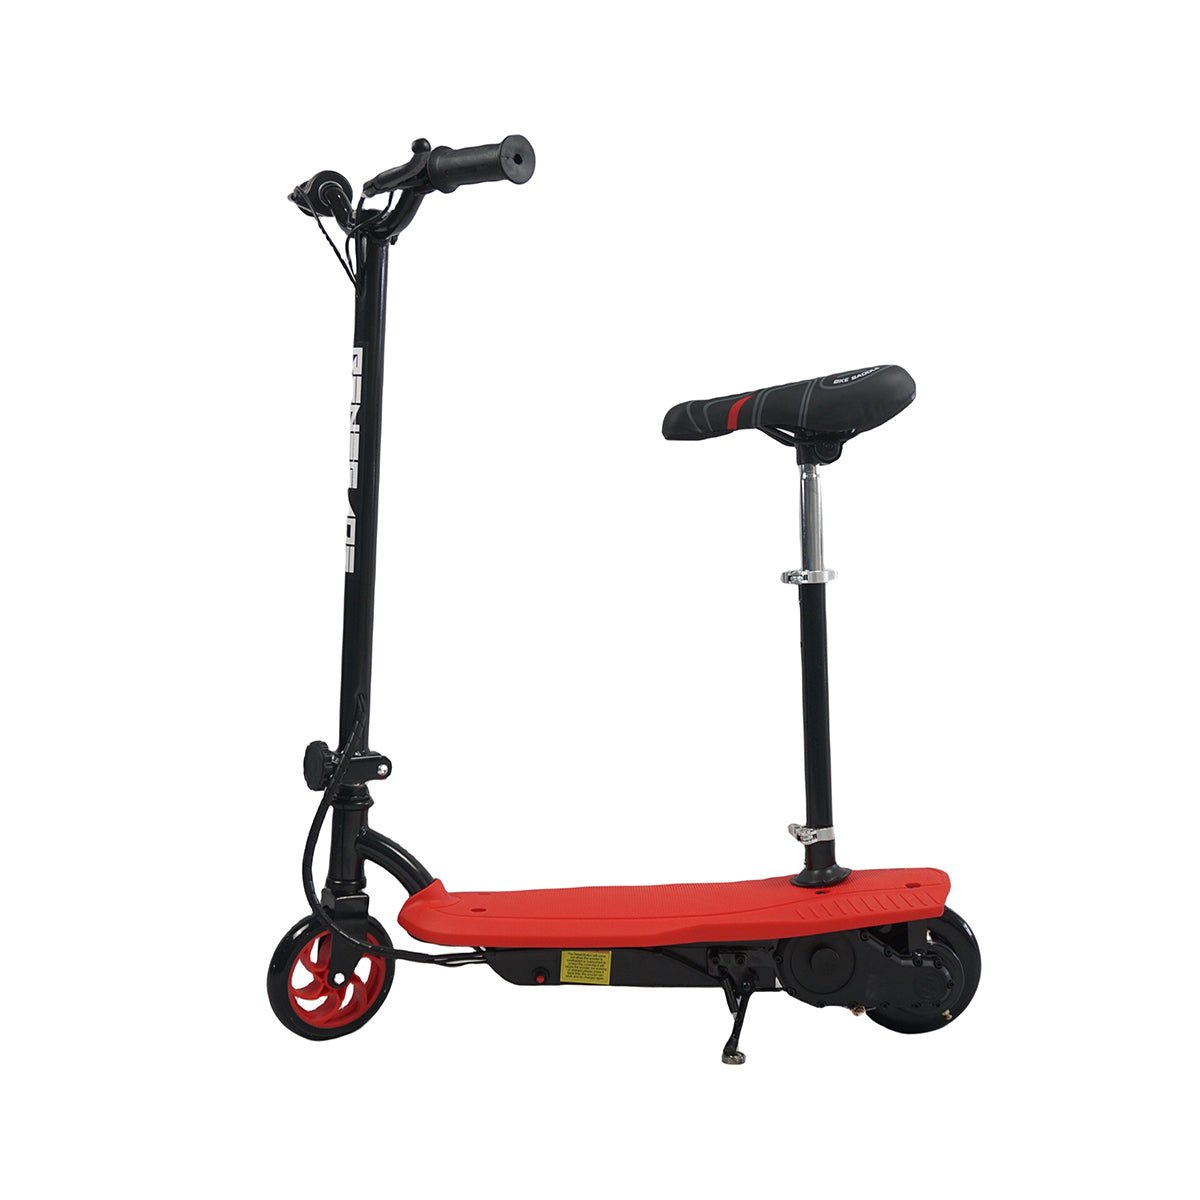 Renegade Plasma 120W Kids Electric Scooter - Red